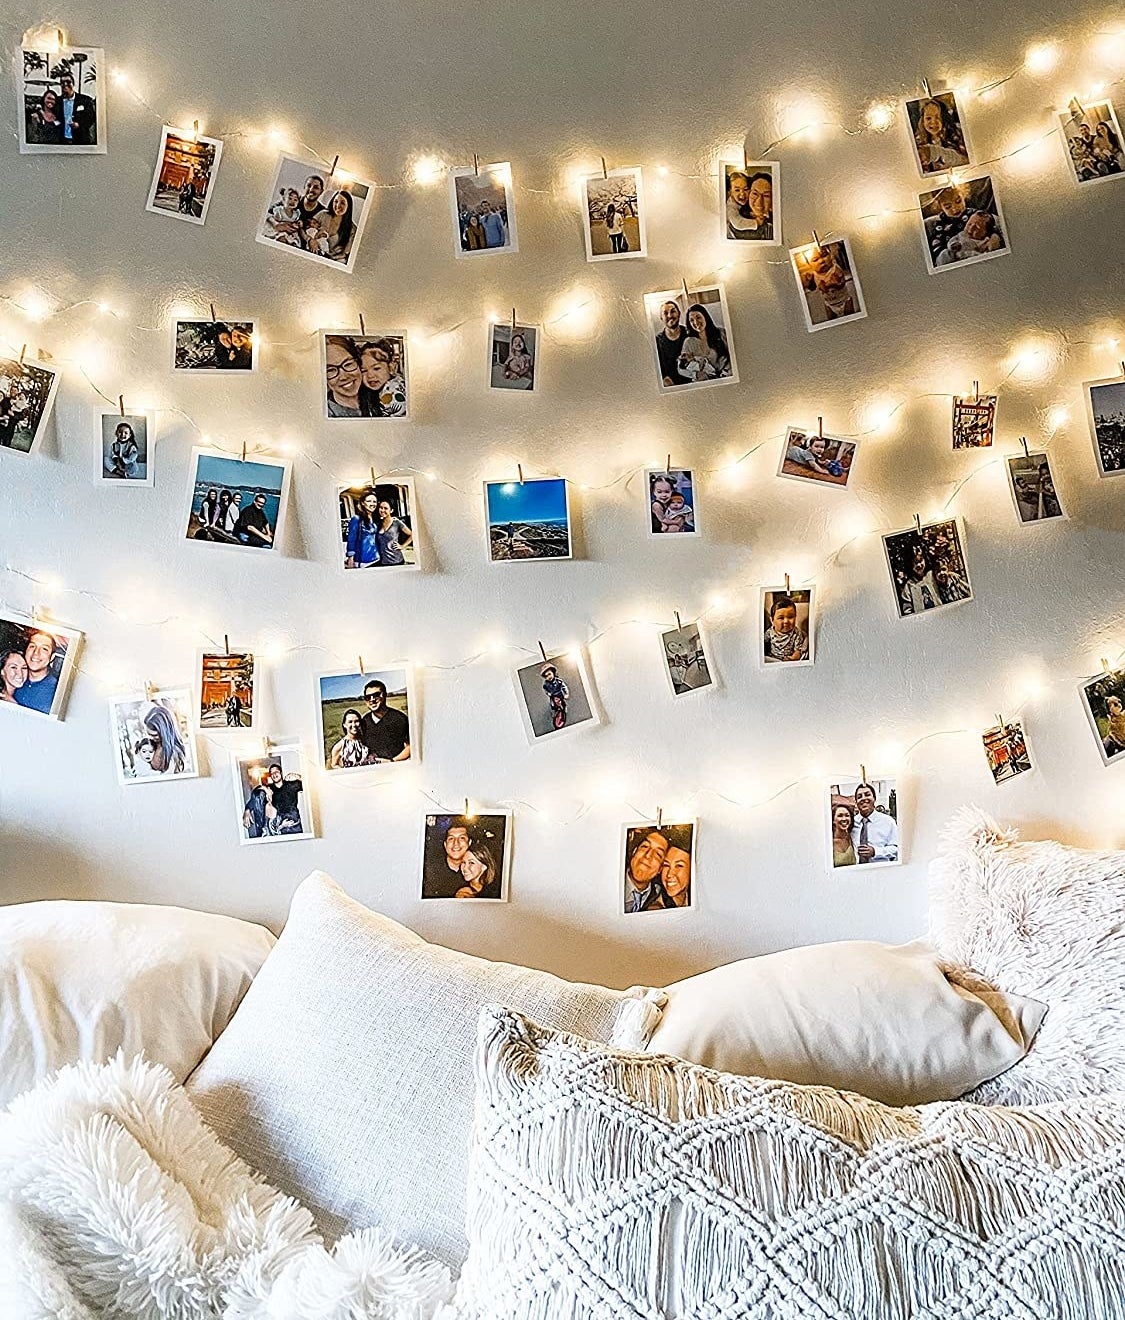 The lights hanging on a wall and strung with photos on clothespins